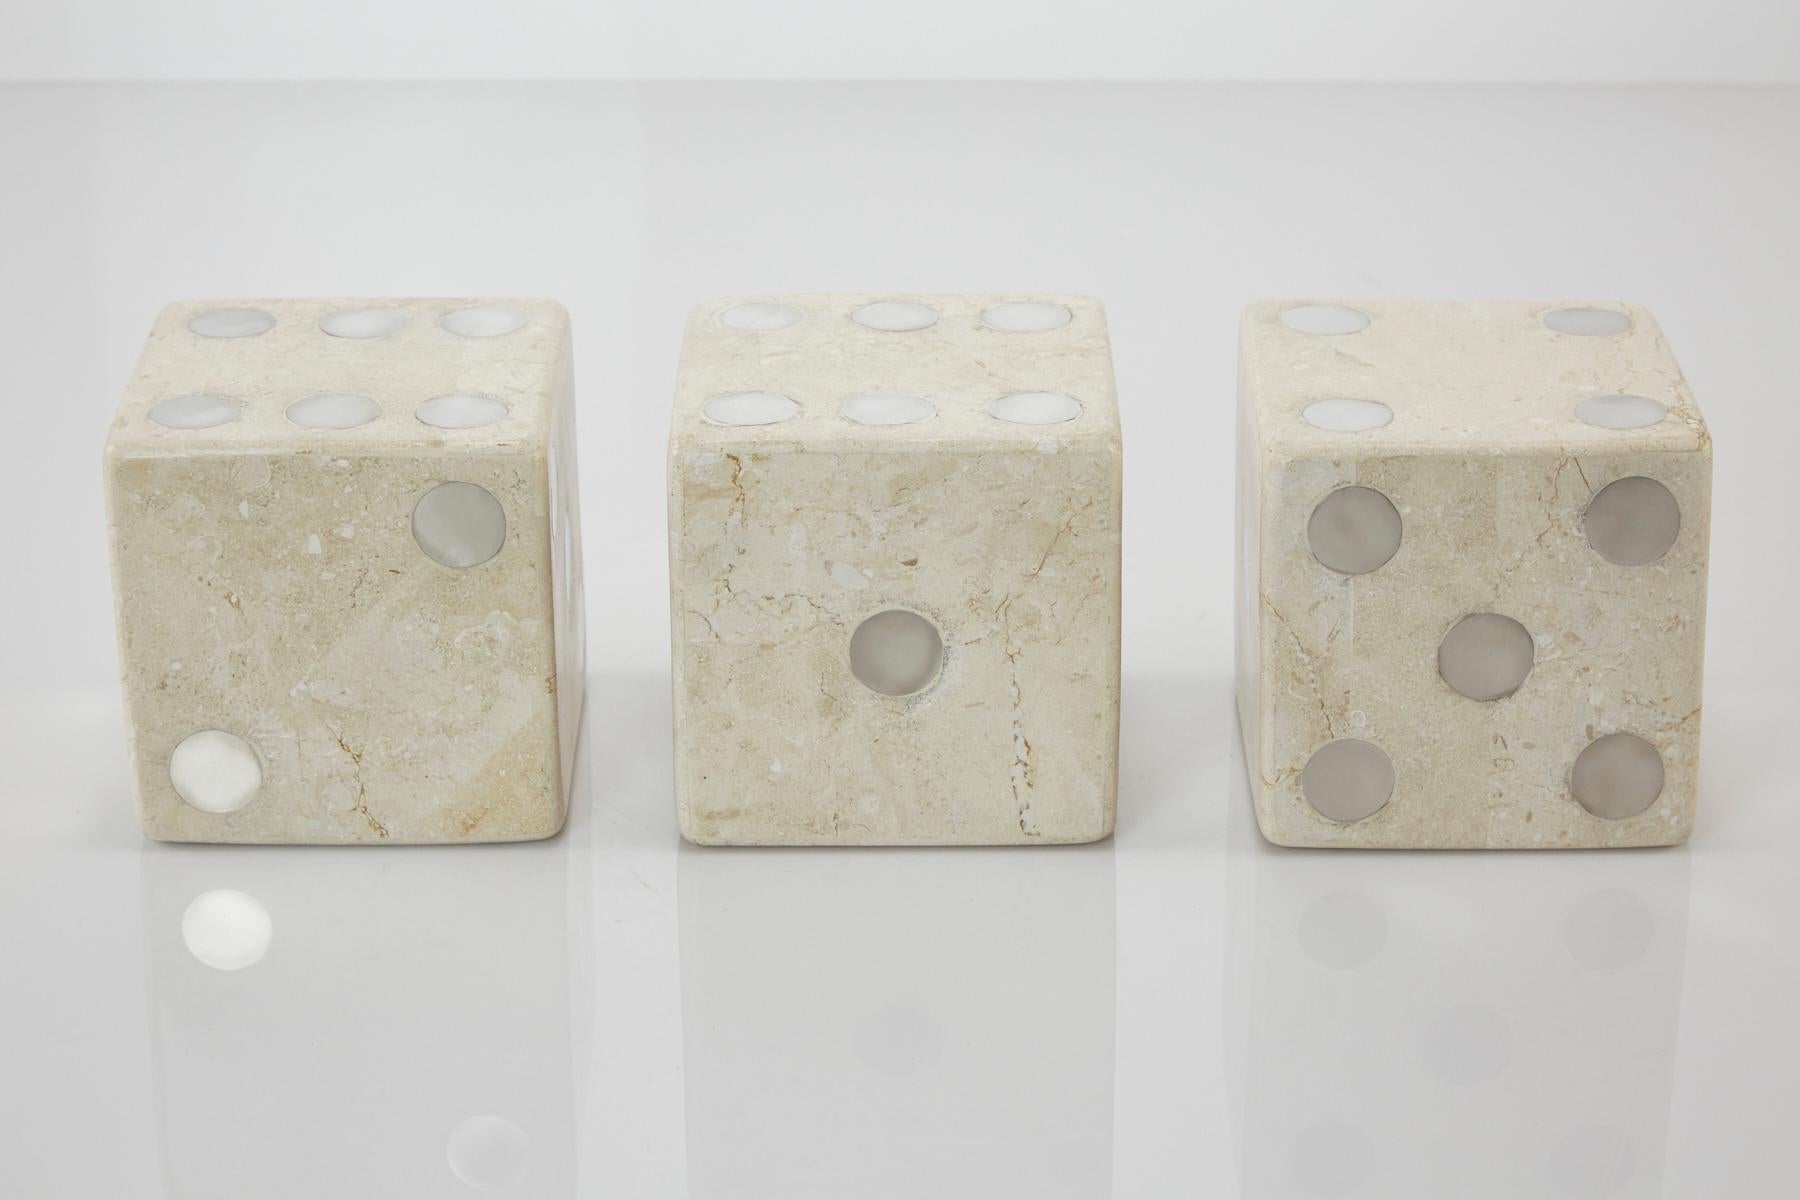 Set of three large decorative dice. Each comprised of white tessellated stone inlay over wooden bodies with stainless steel accents. Oversized at 5